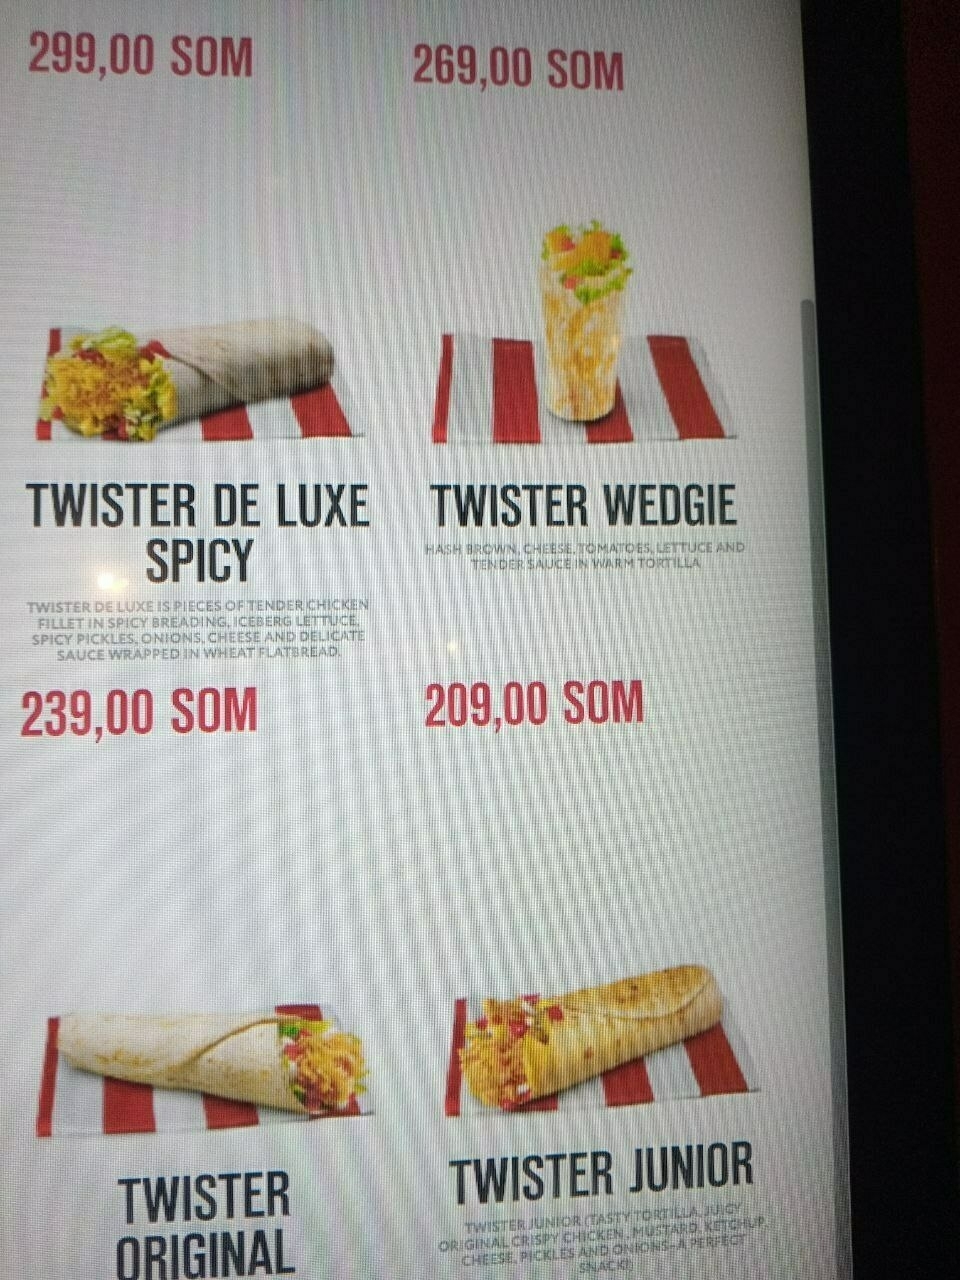 4 items on a screen at a KFC kiosk with one of them named "twister wedgie"